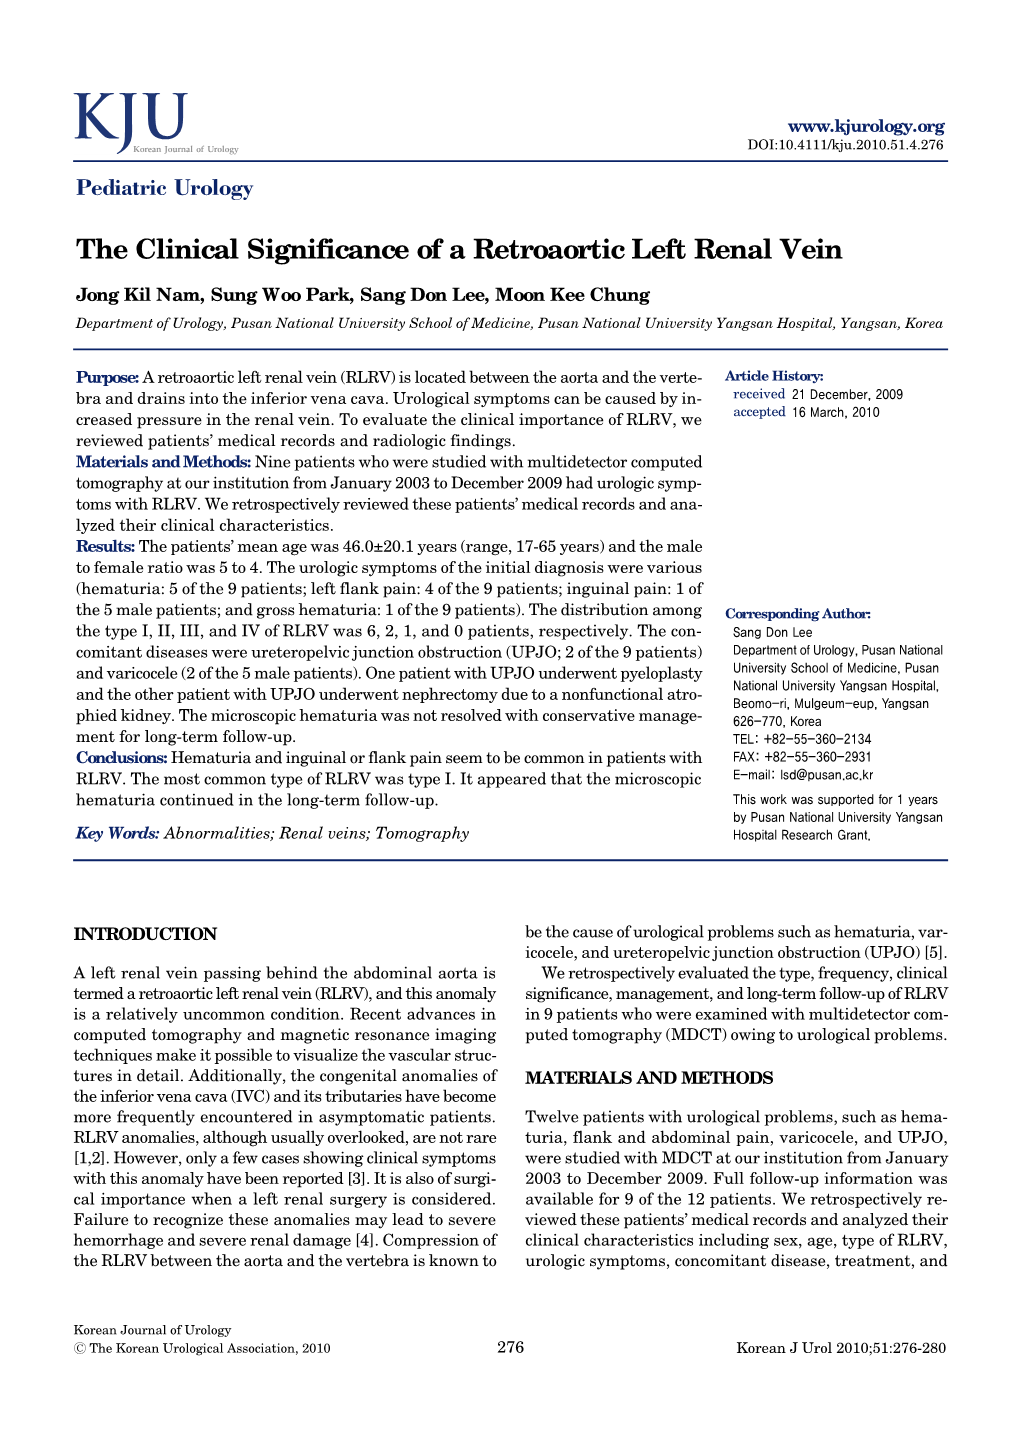 The Clinical Significance of a Retroaortic Left Renal Vein